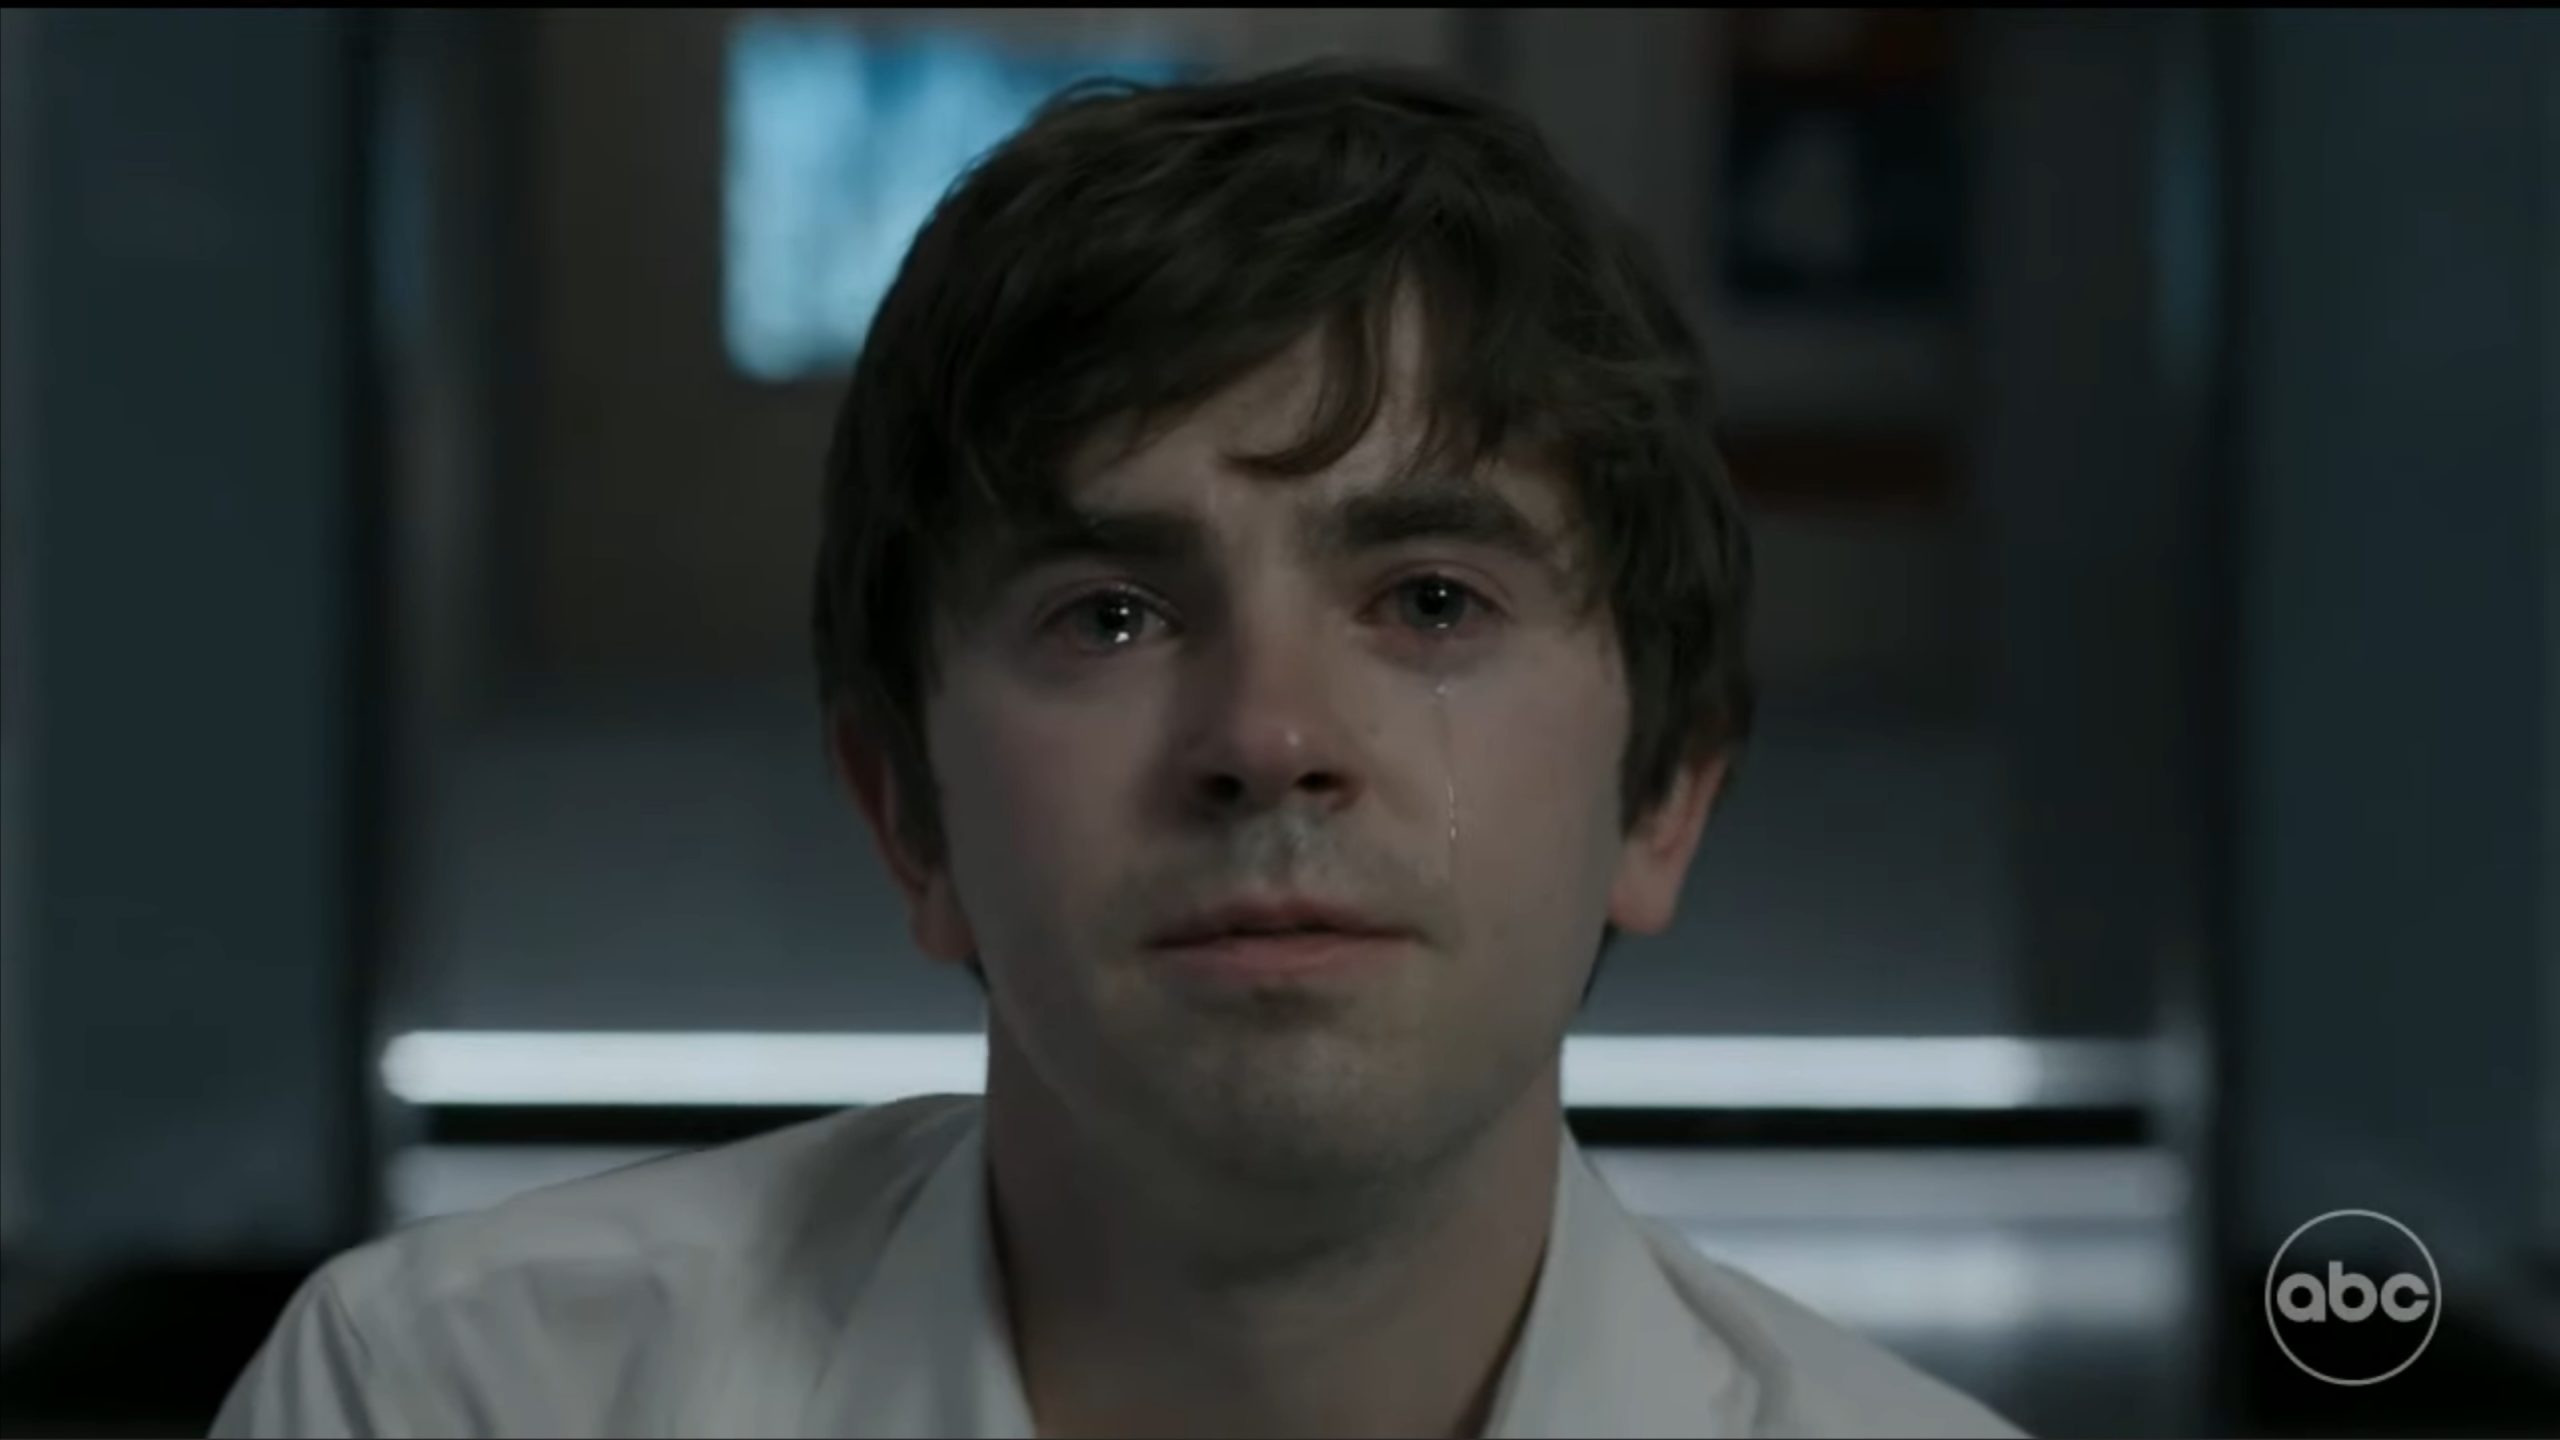 The Good Doctor: Season 6/ Episode 1 “Afterparty” – Recap/ Review (with Spoilers)